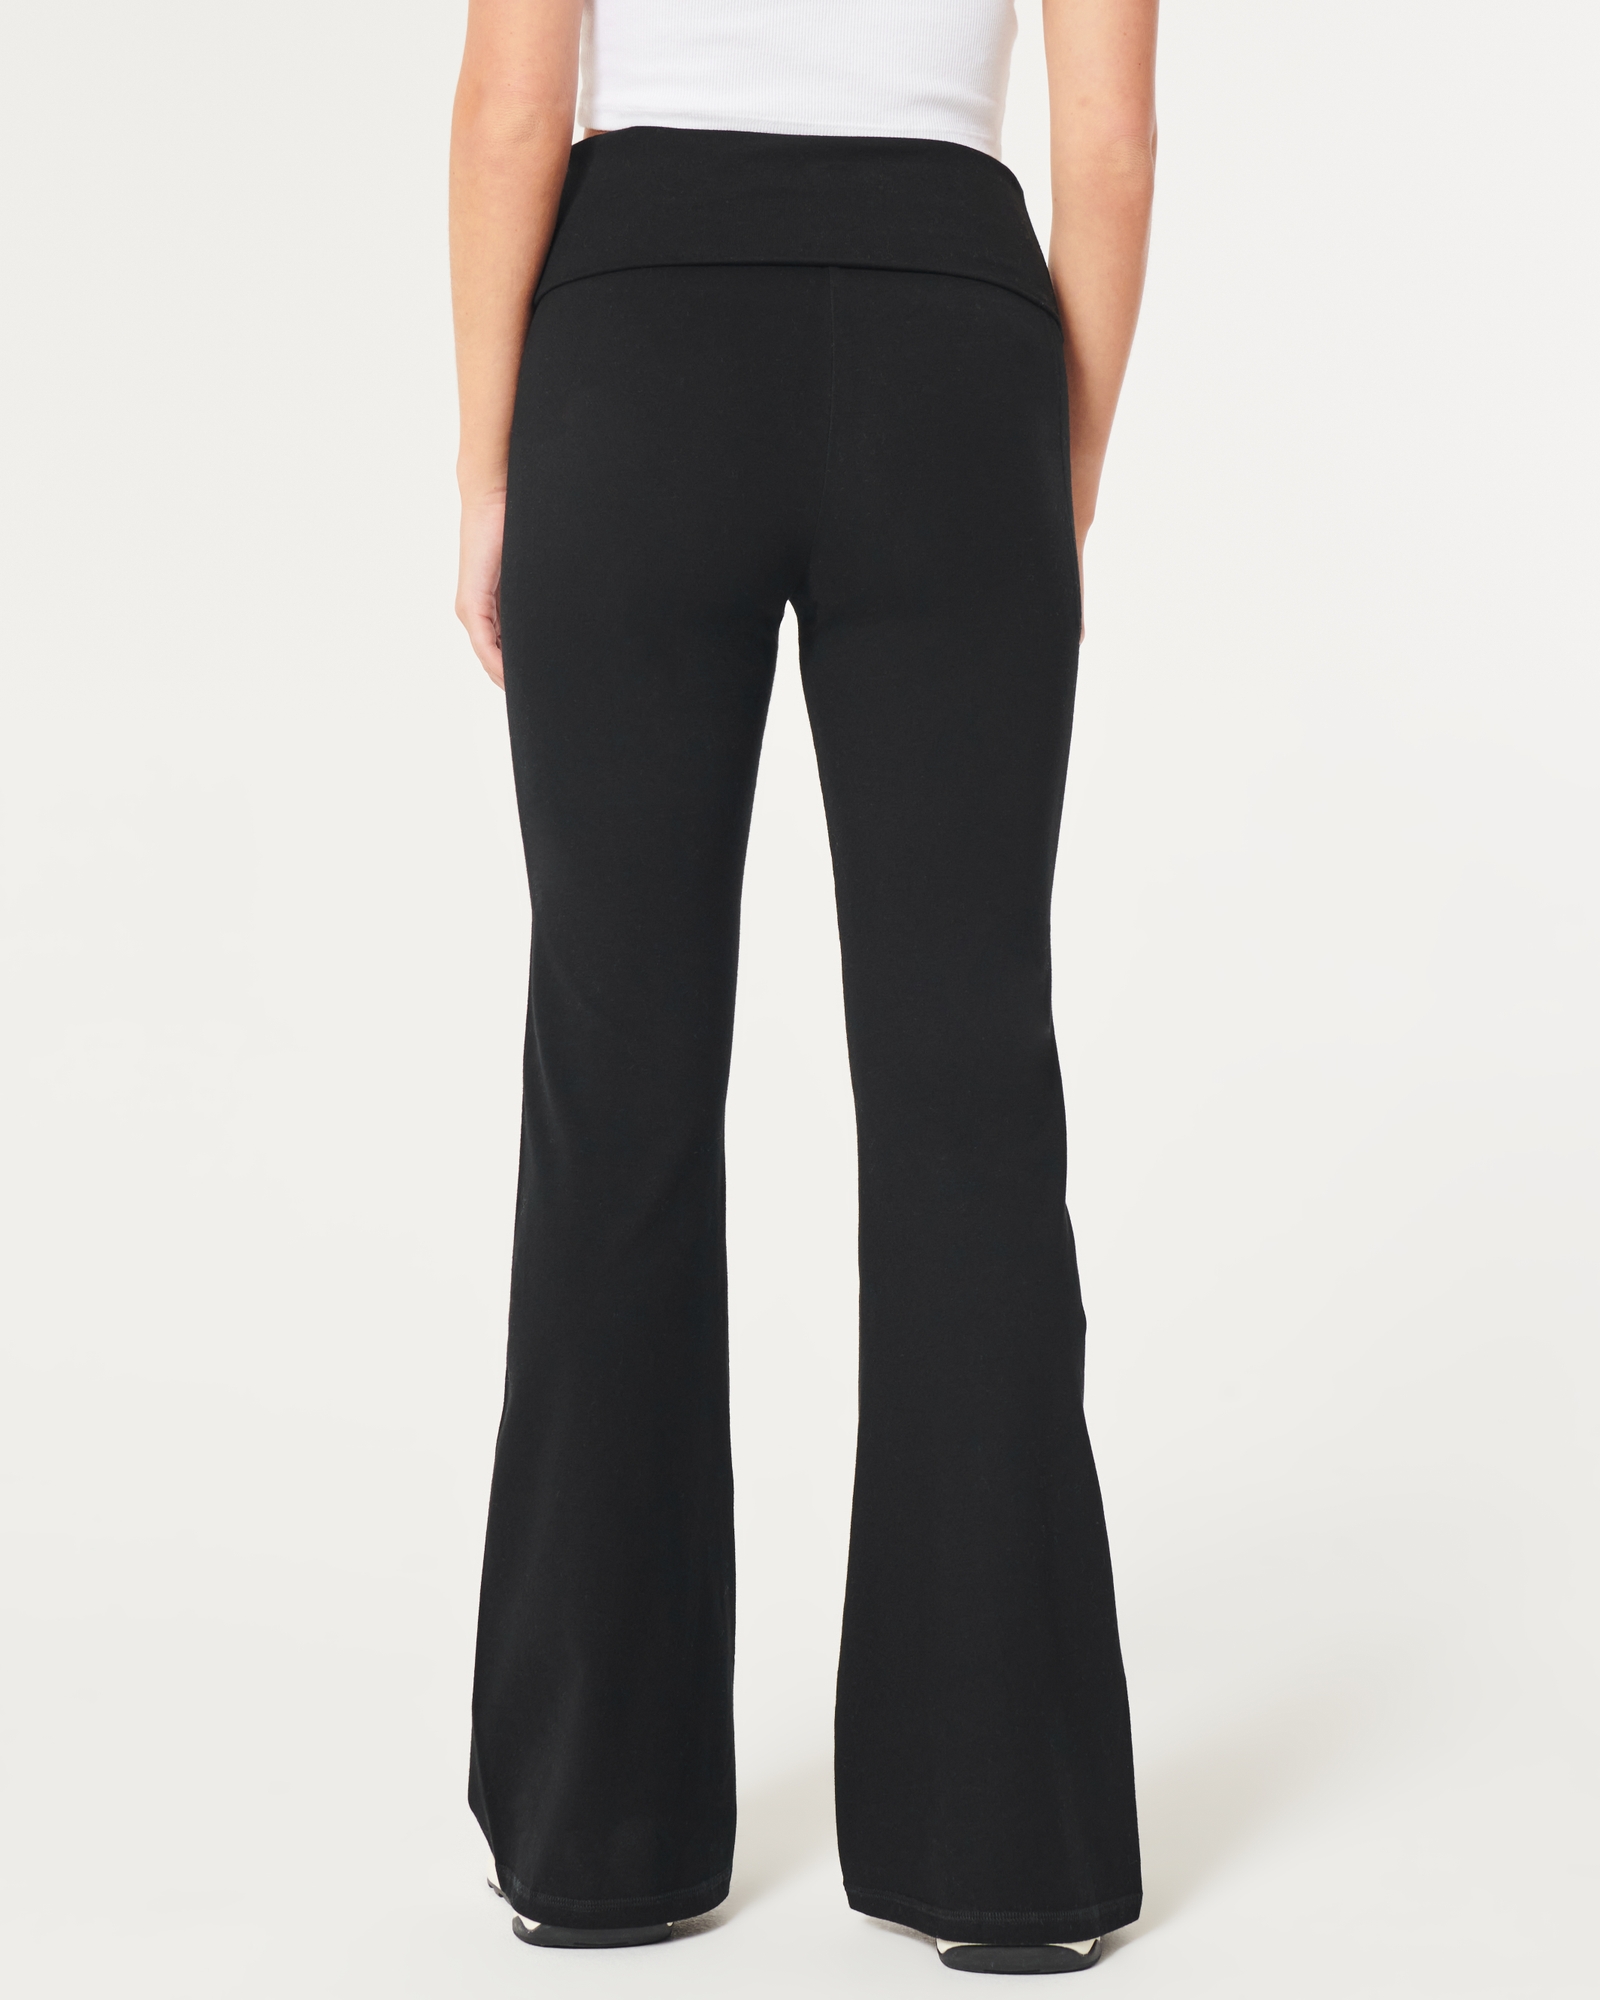 Sexy High Waist Stretch Flare Pants Leggings For Women Loose And Thin Leg  Pants, Size 14 From Jessicarick, $26.97